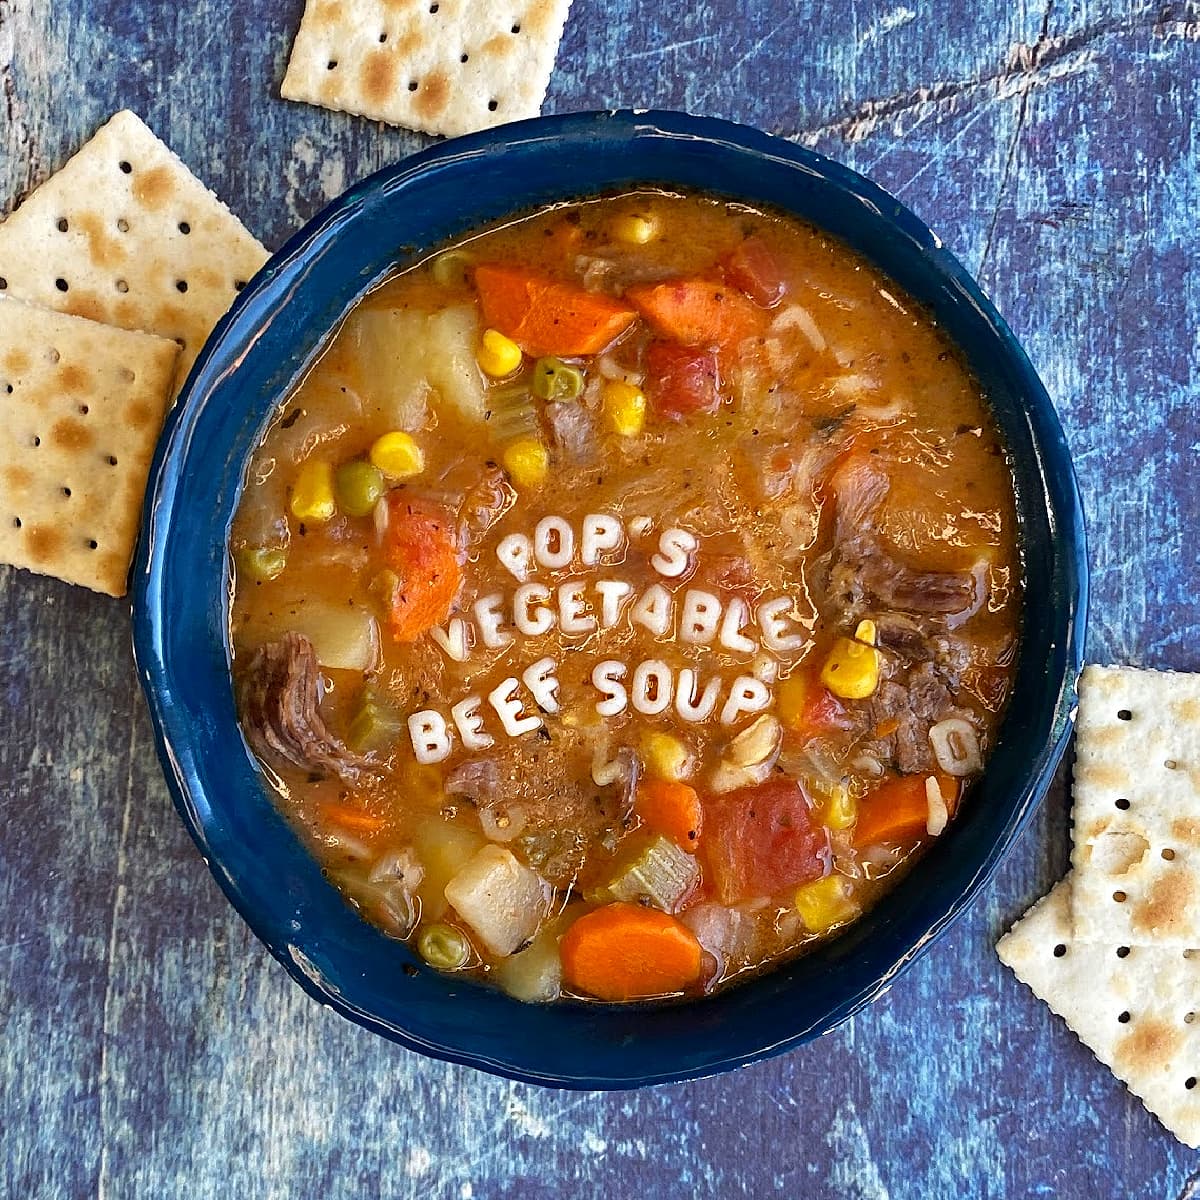 A bowl of vegetable soup, with saltine crackers strewn at the foot of the bowl. Alphabet letters spell out "Pop's Vegetable Beef Soup" across the top of the soup. 